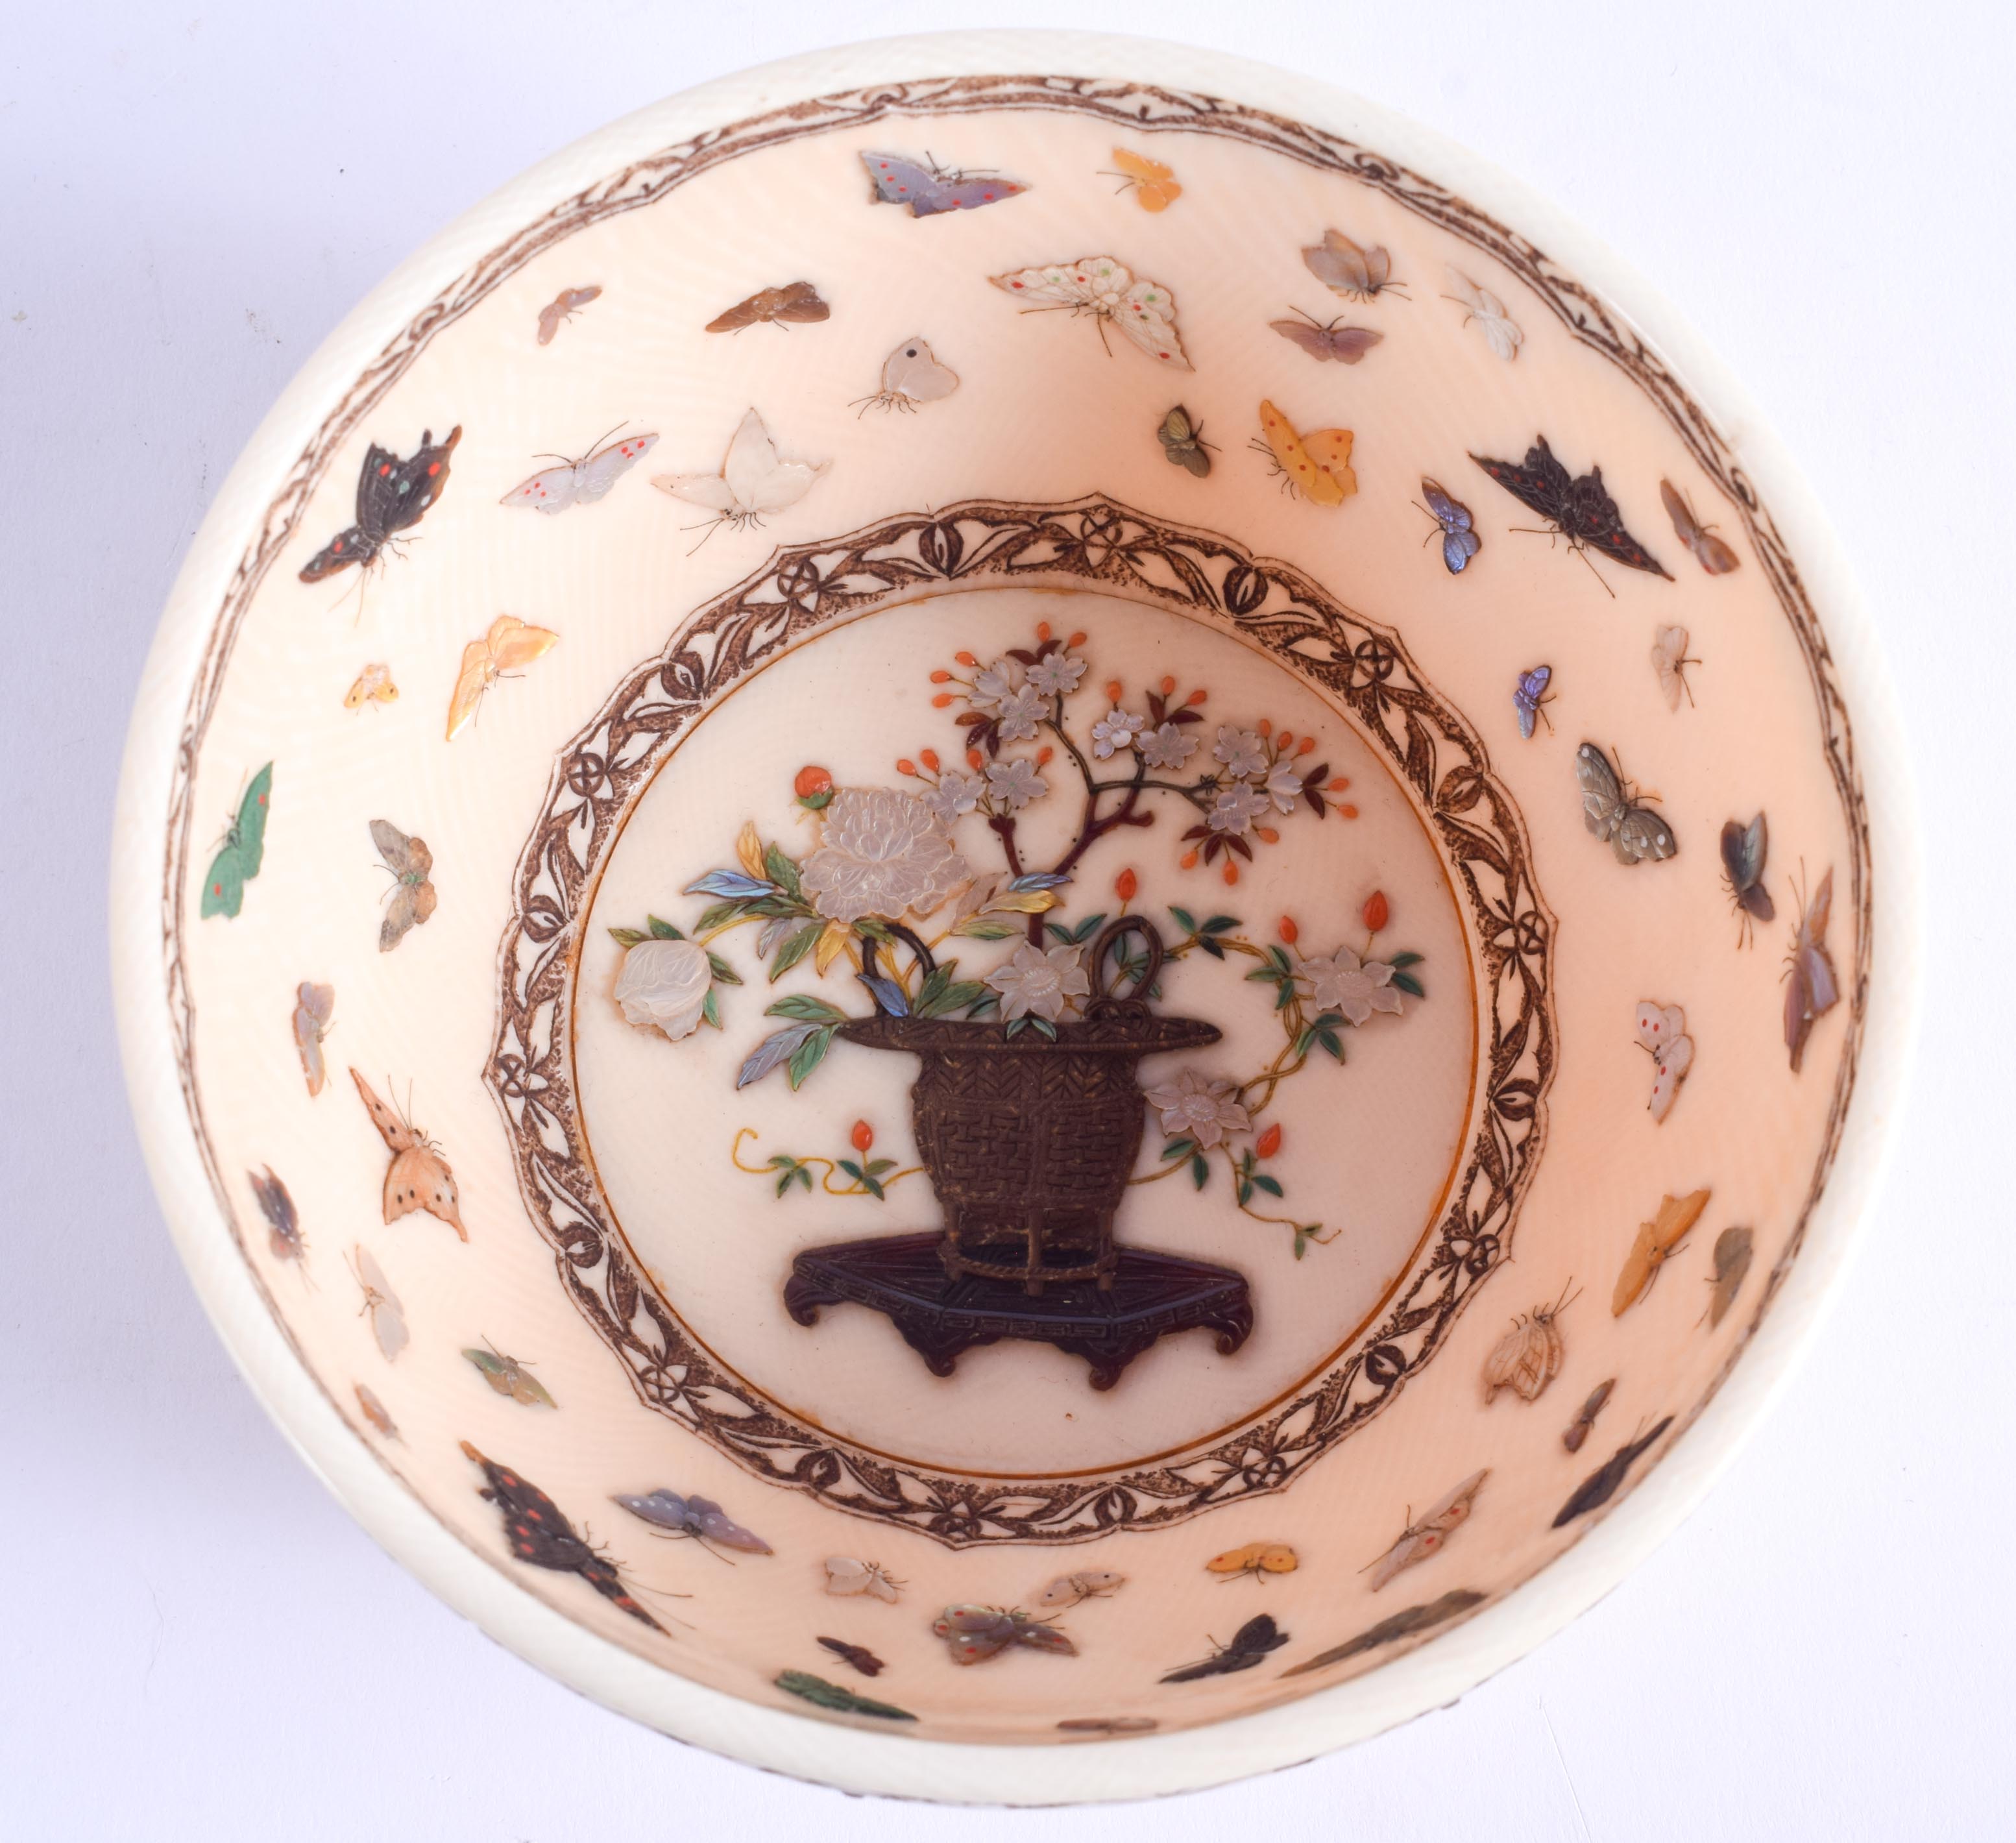 A FINE 19TH CENTURY JAPANESE MEIJI PERIOD CARVED SHIBAYAMA IVORY BOWL wonderfully decorated with but